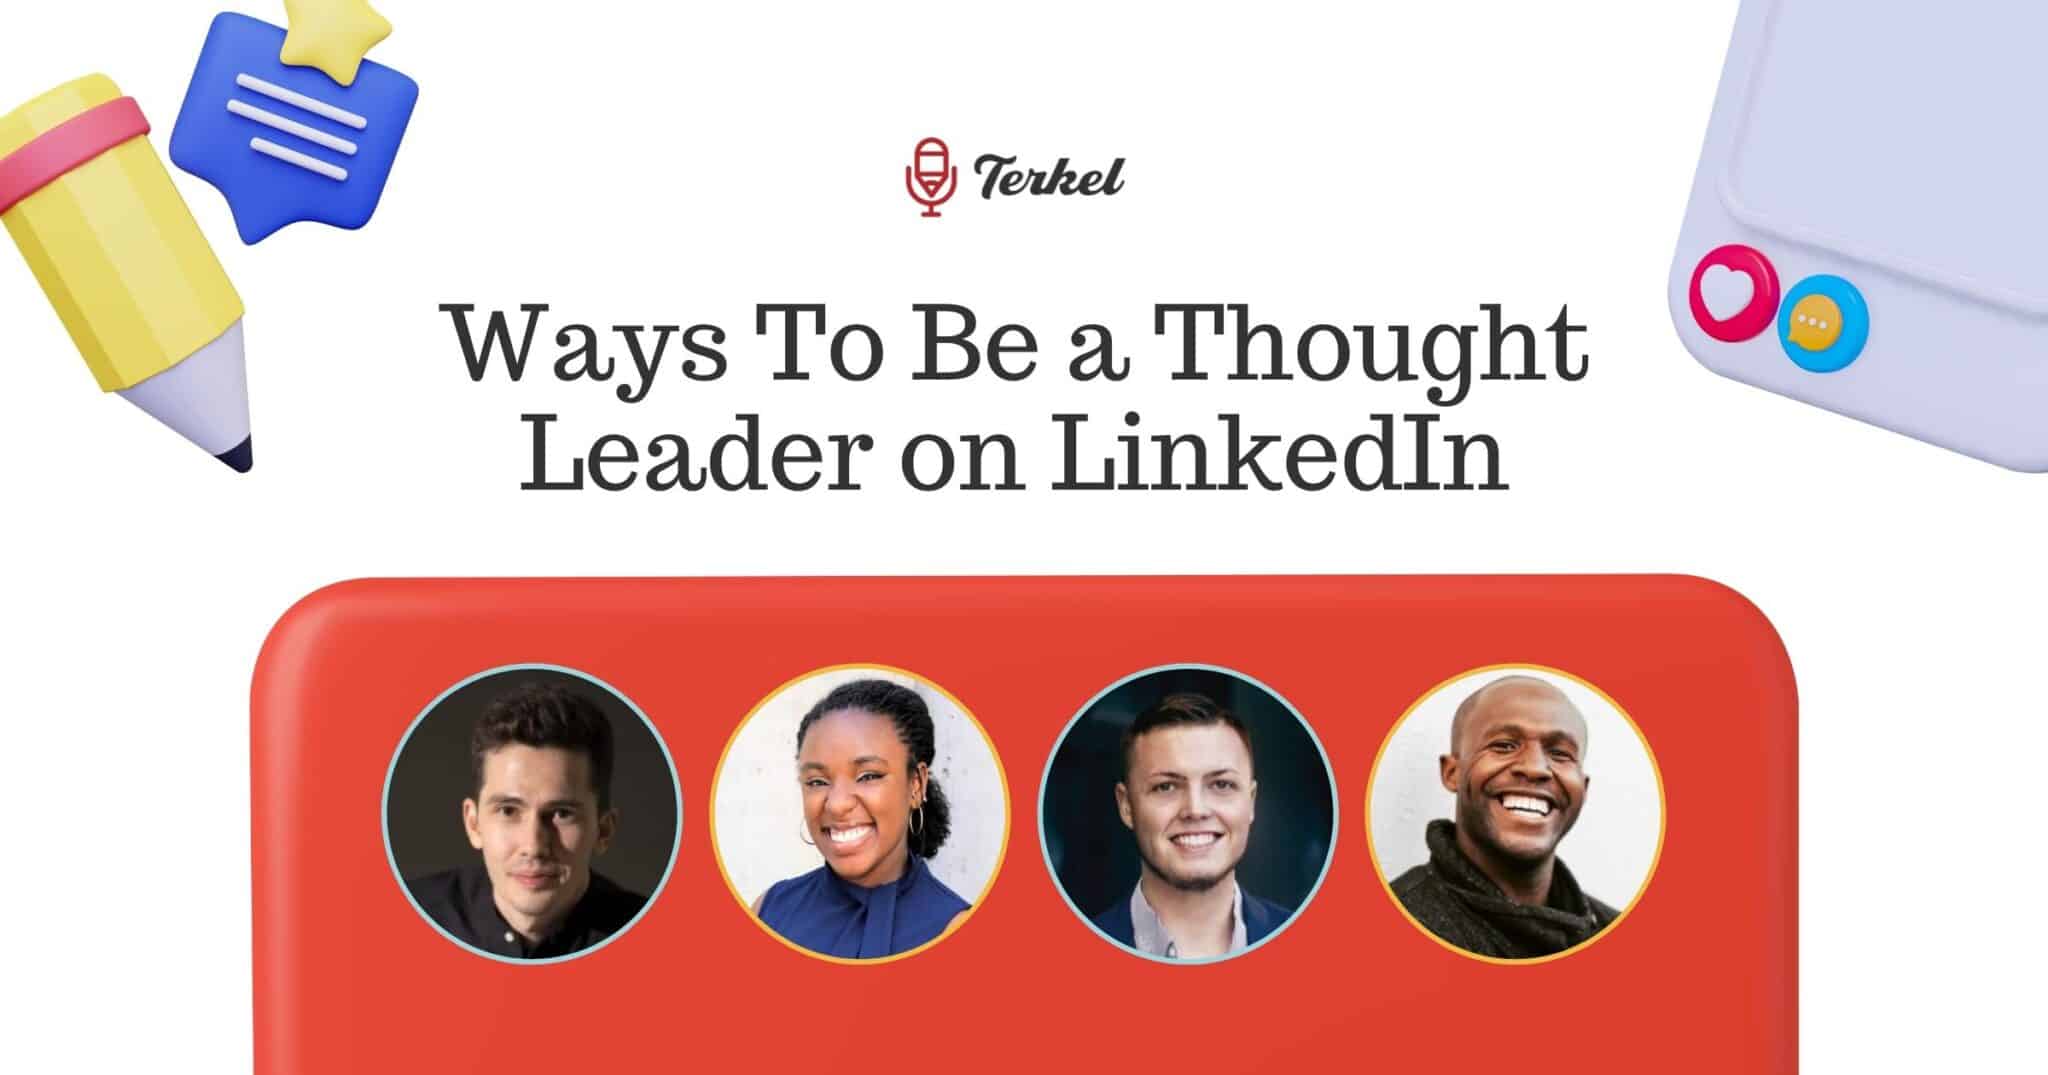 Ways To Be a Thought Leader on LinkedIn